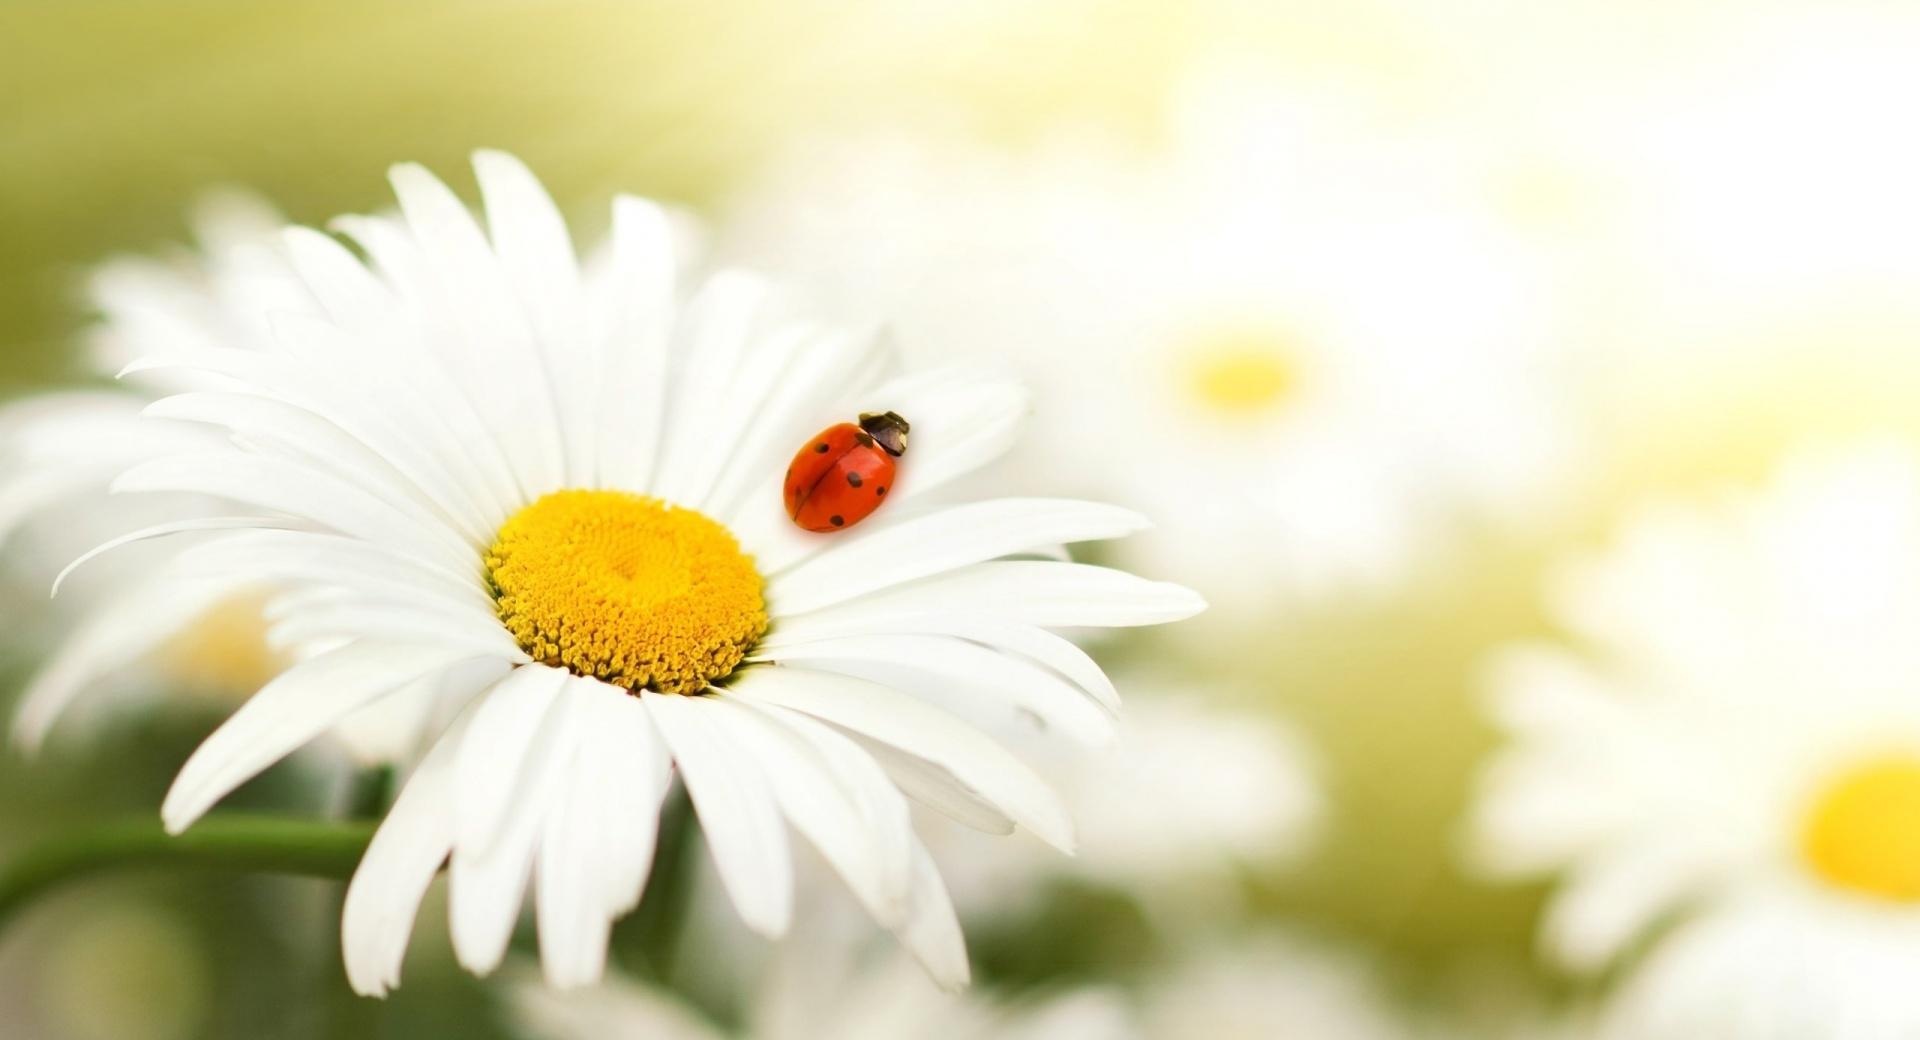 Ladybug On A Daisy wallpapers HD quality